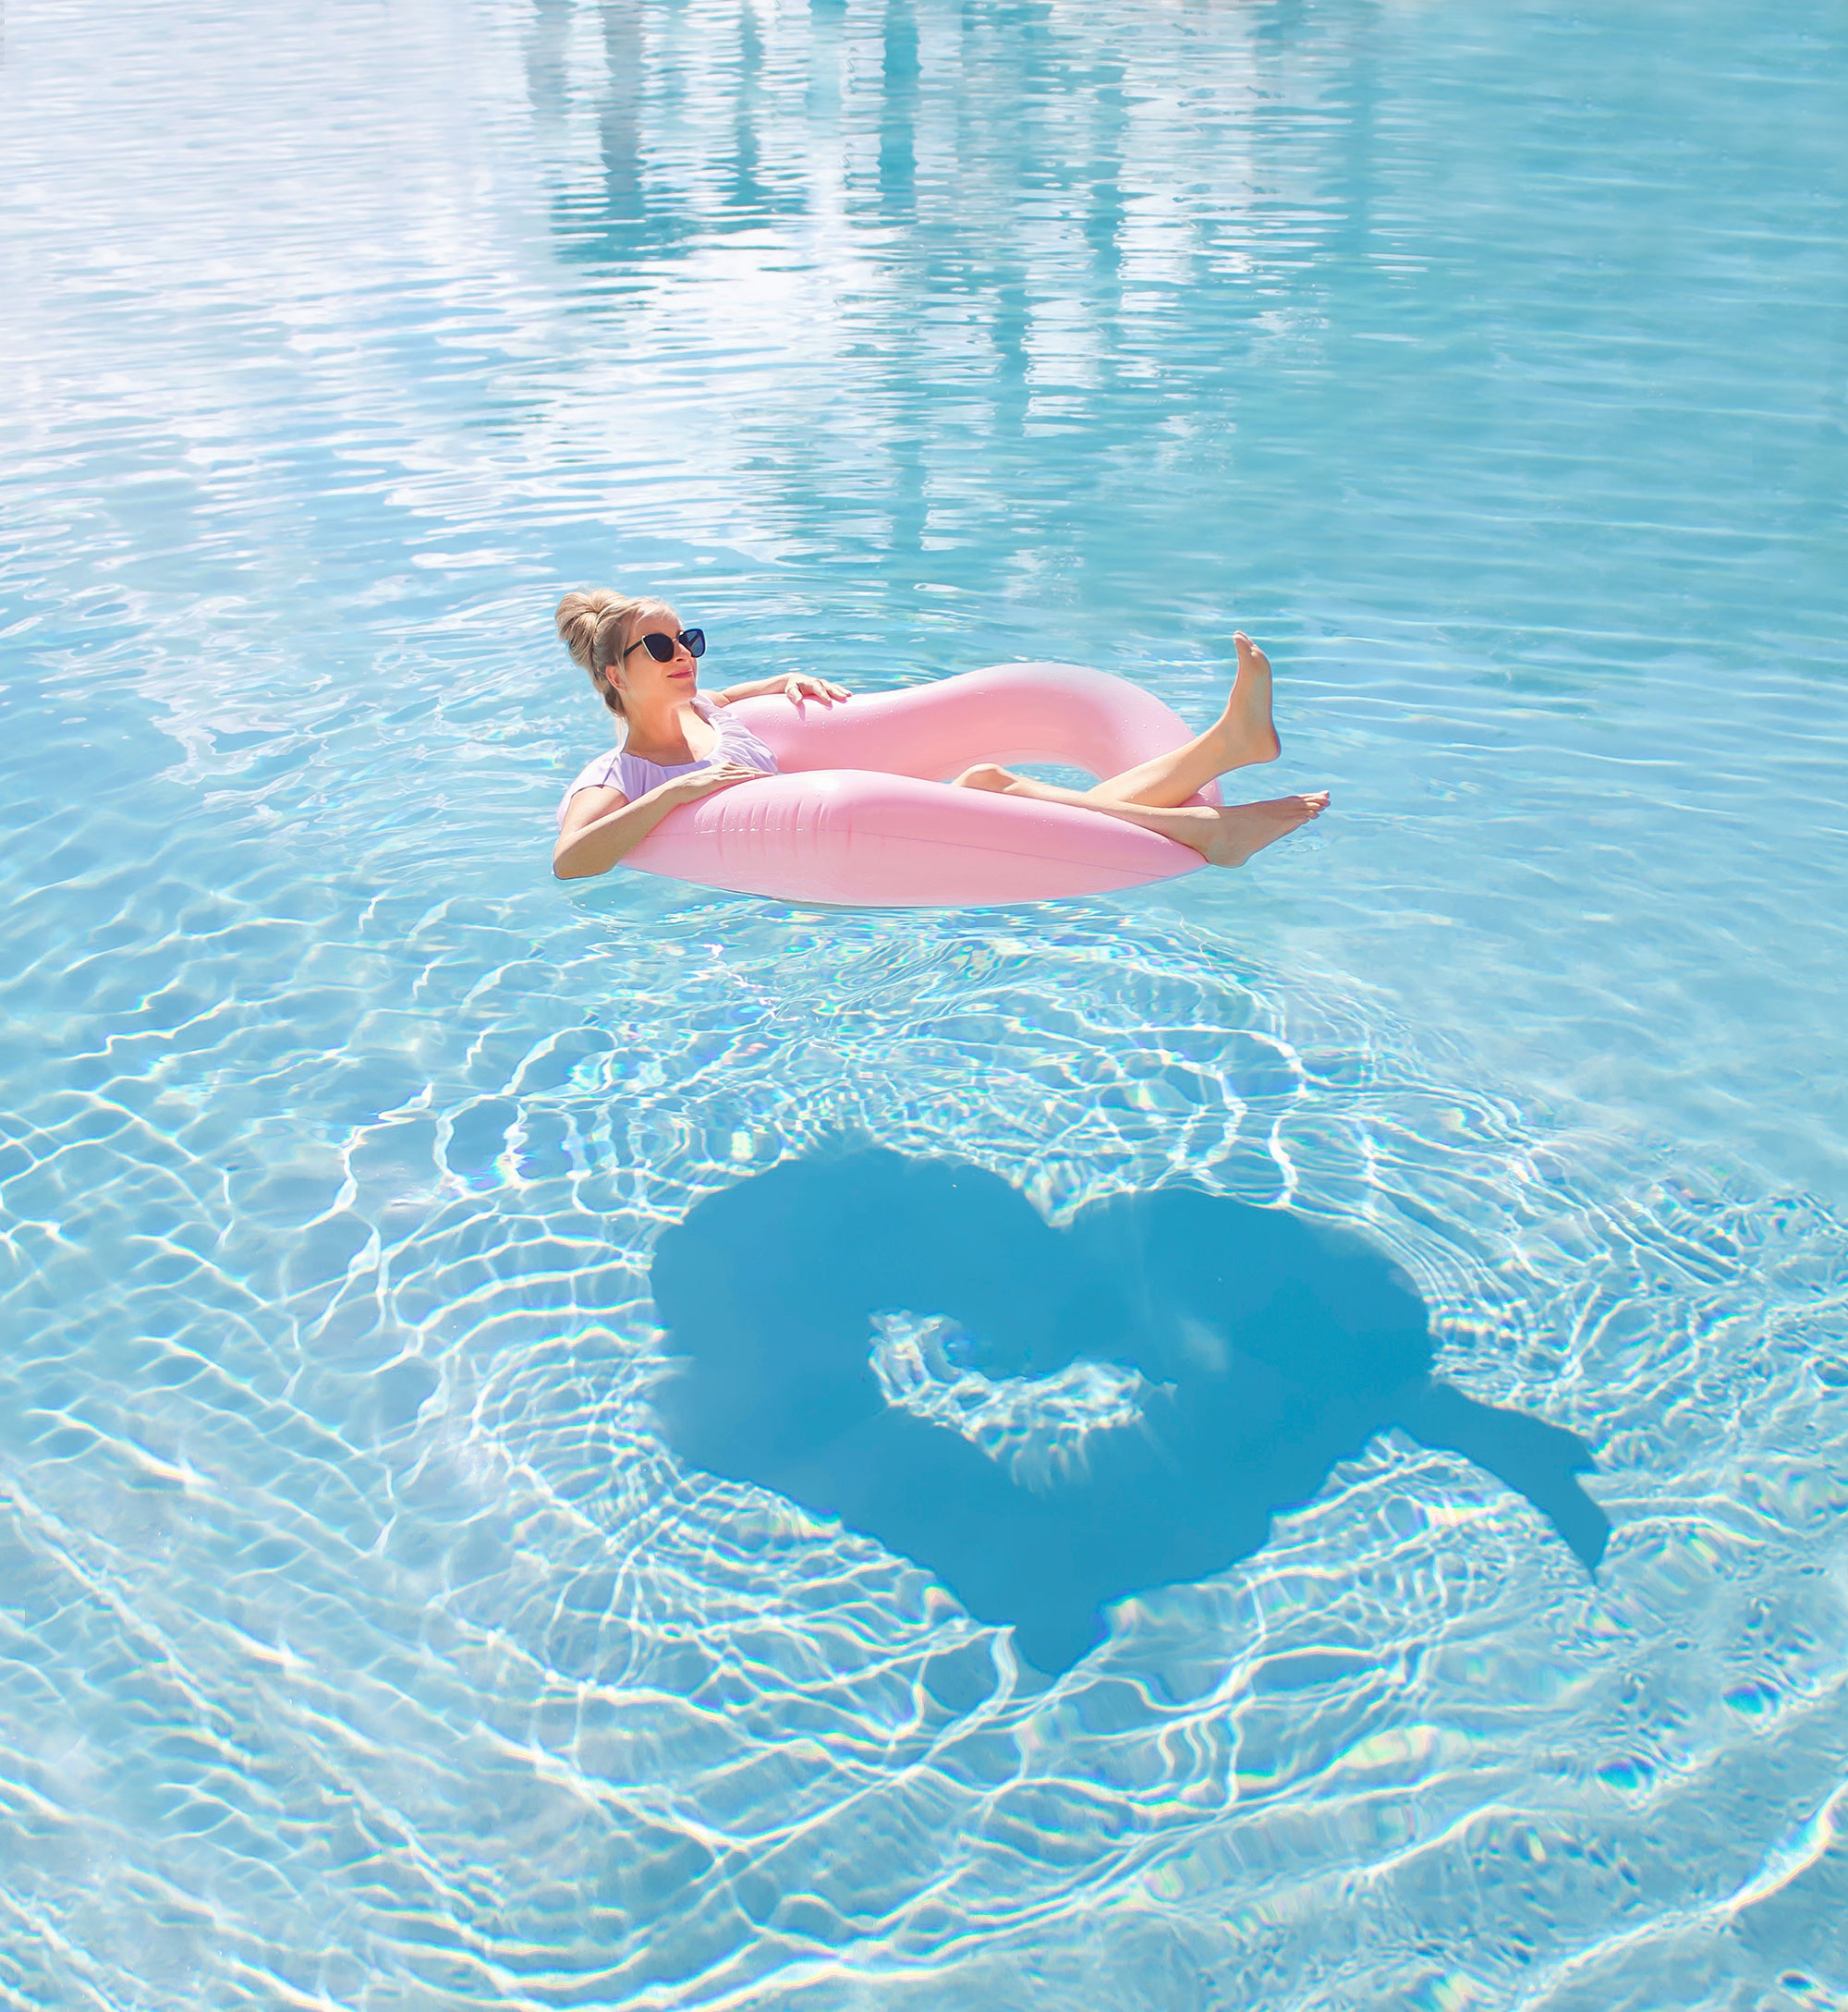 Florida Blogger, The Lovely Flamingo floats on a heart shaped float in a pool with a heart shaped reflection in the water.